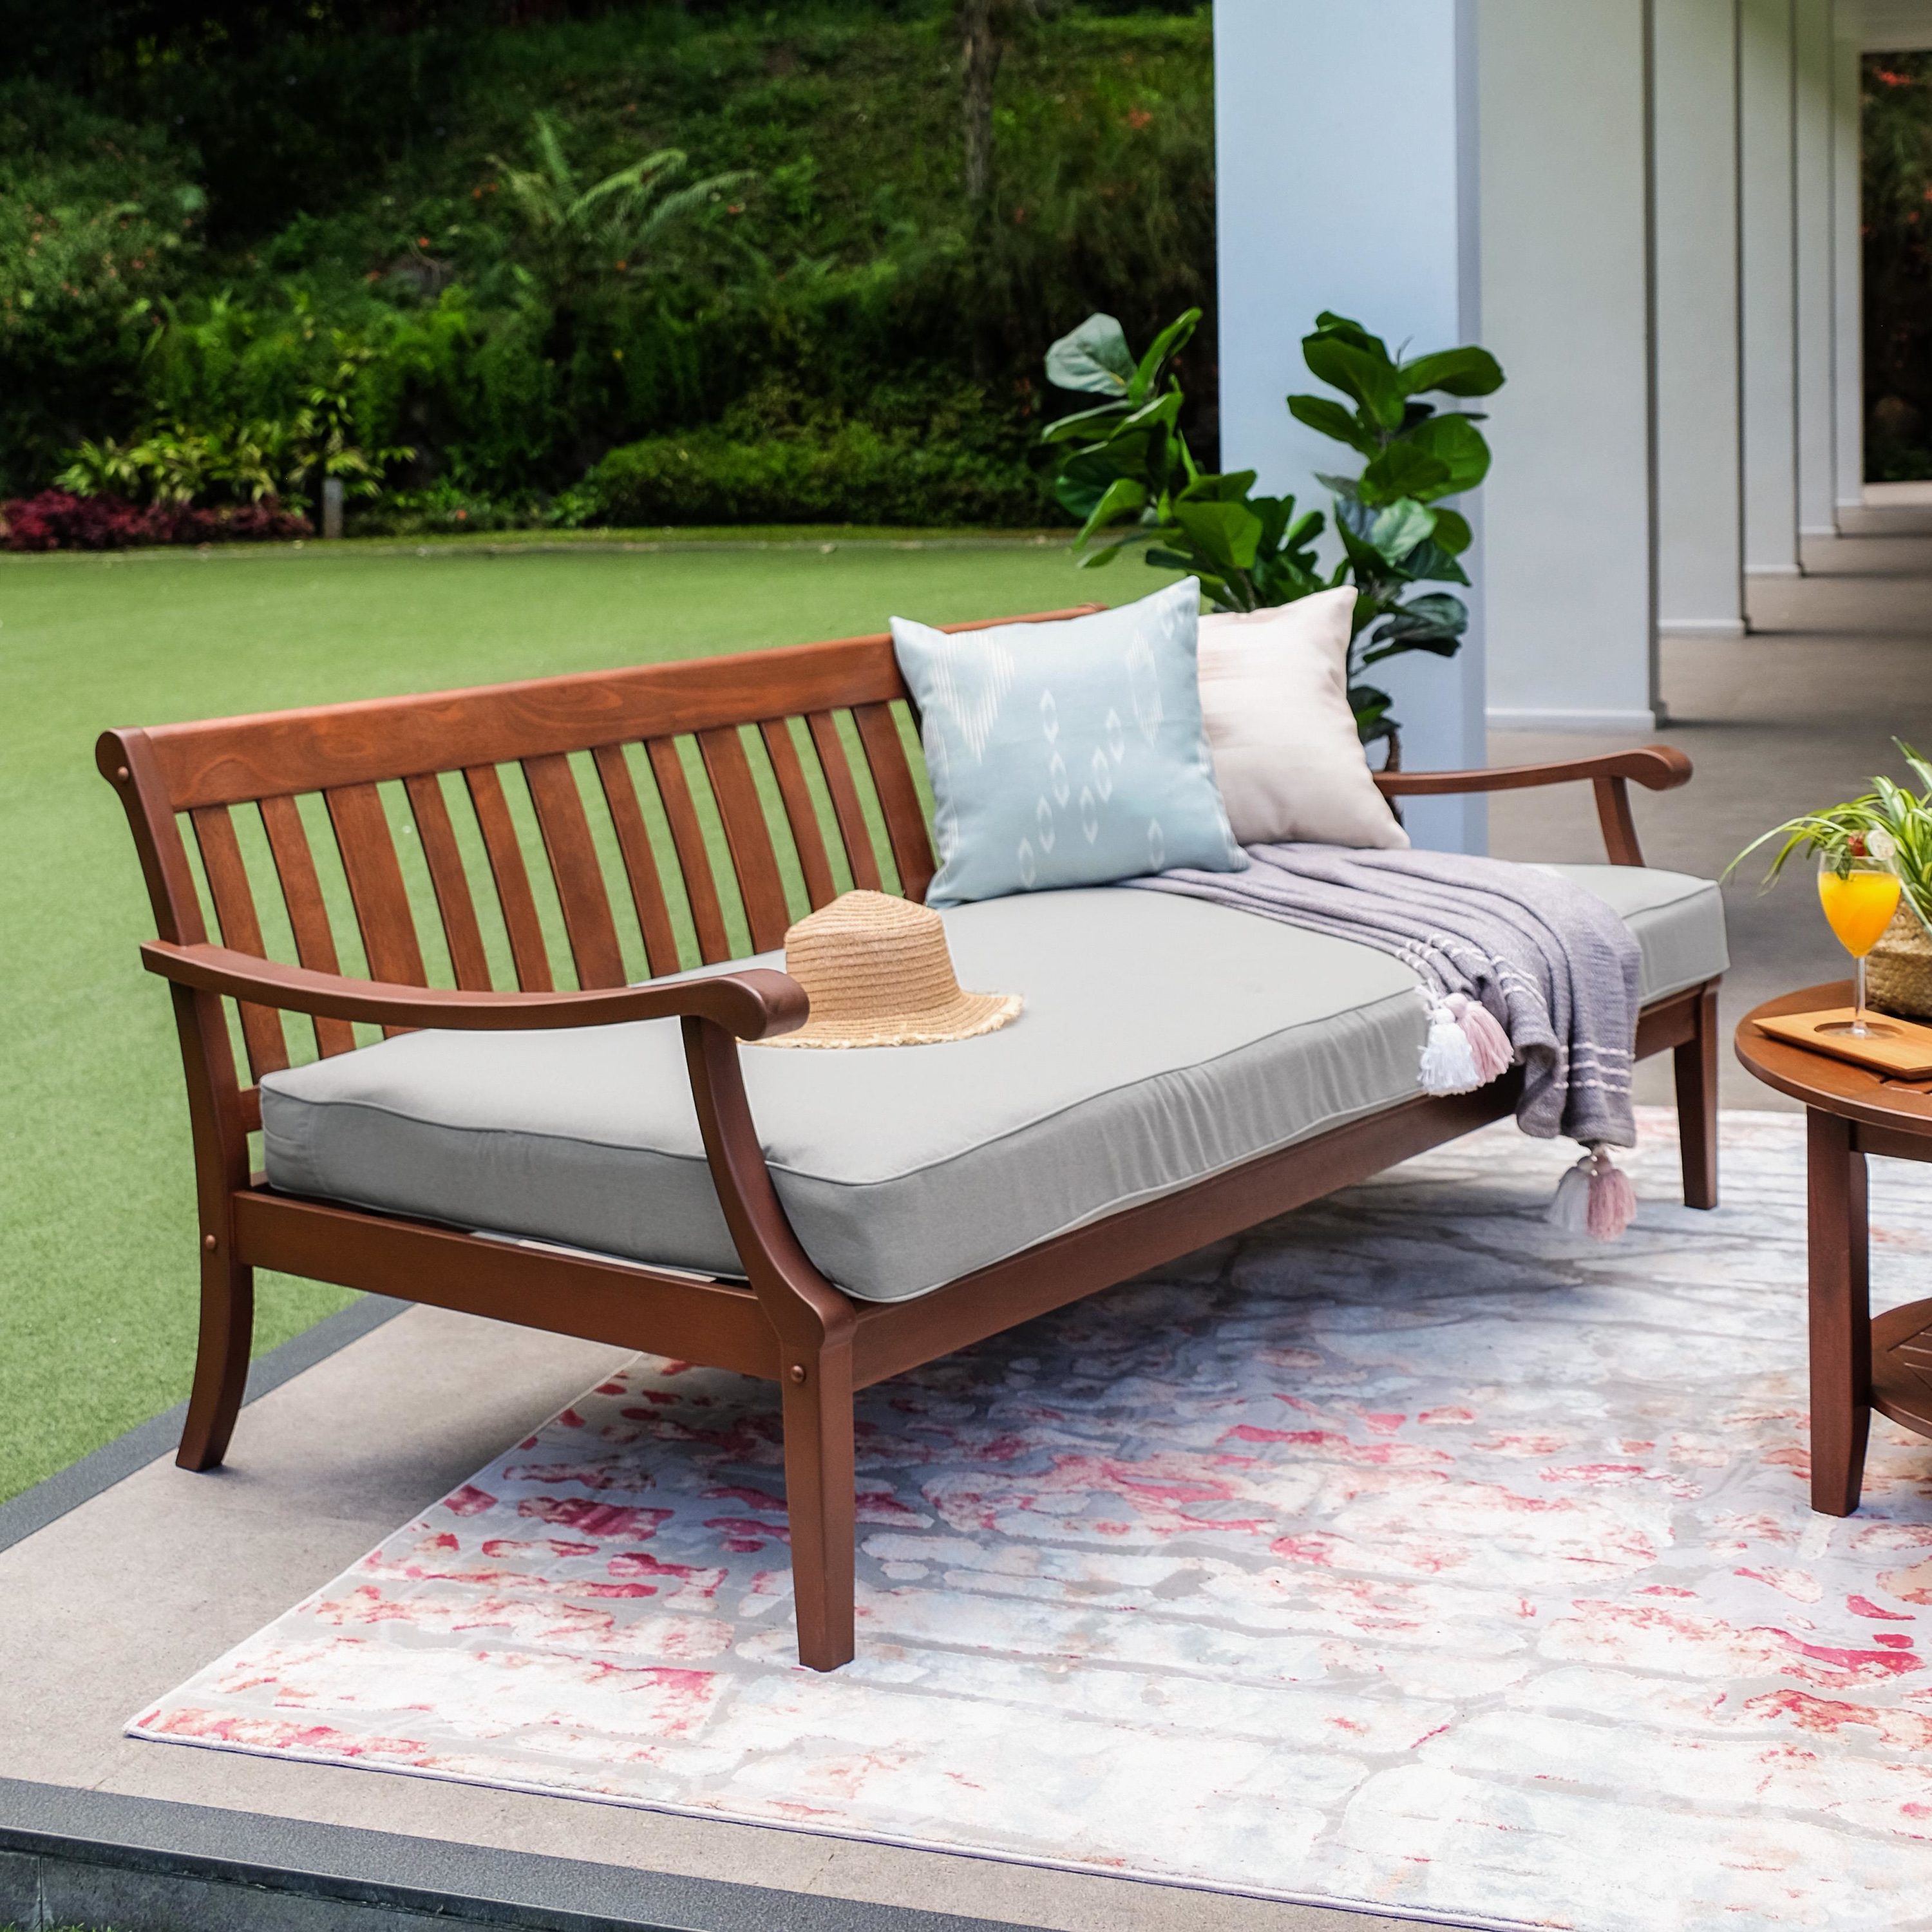 Cambridge Casual Wales Wood Outdoor Sofa Daybed with Oyster Cushion in ...